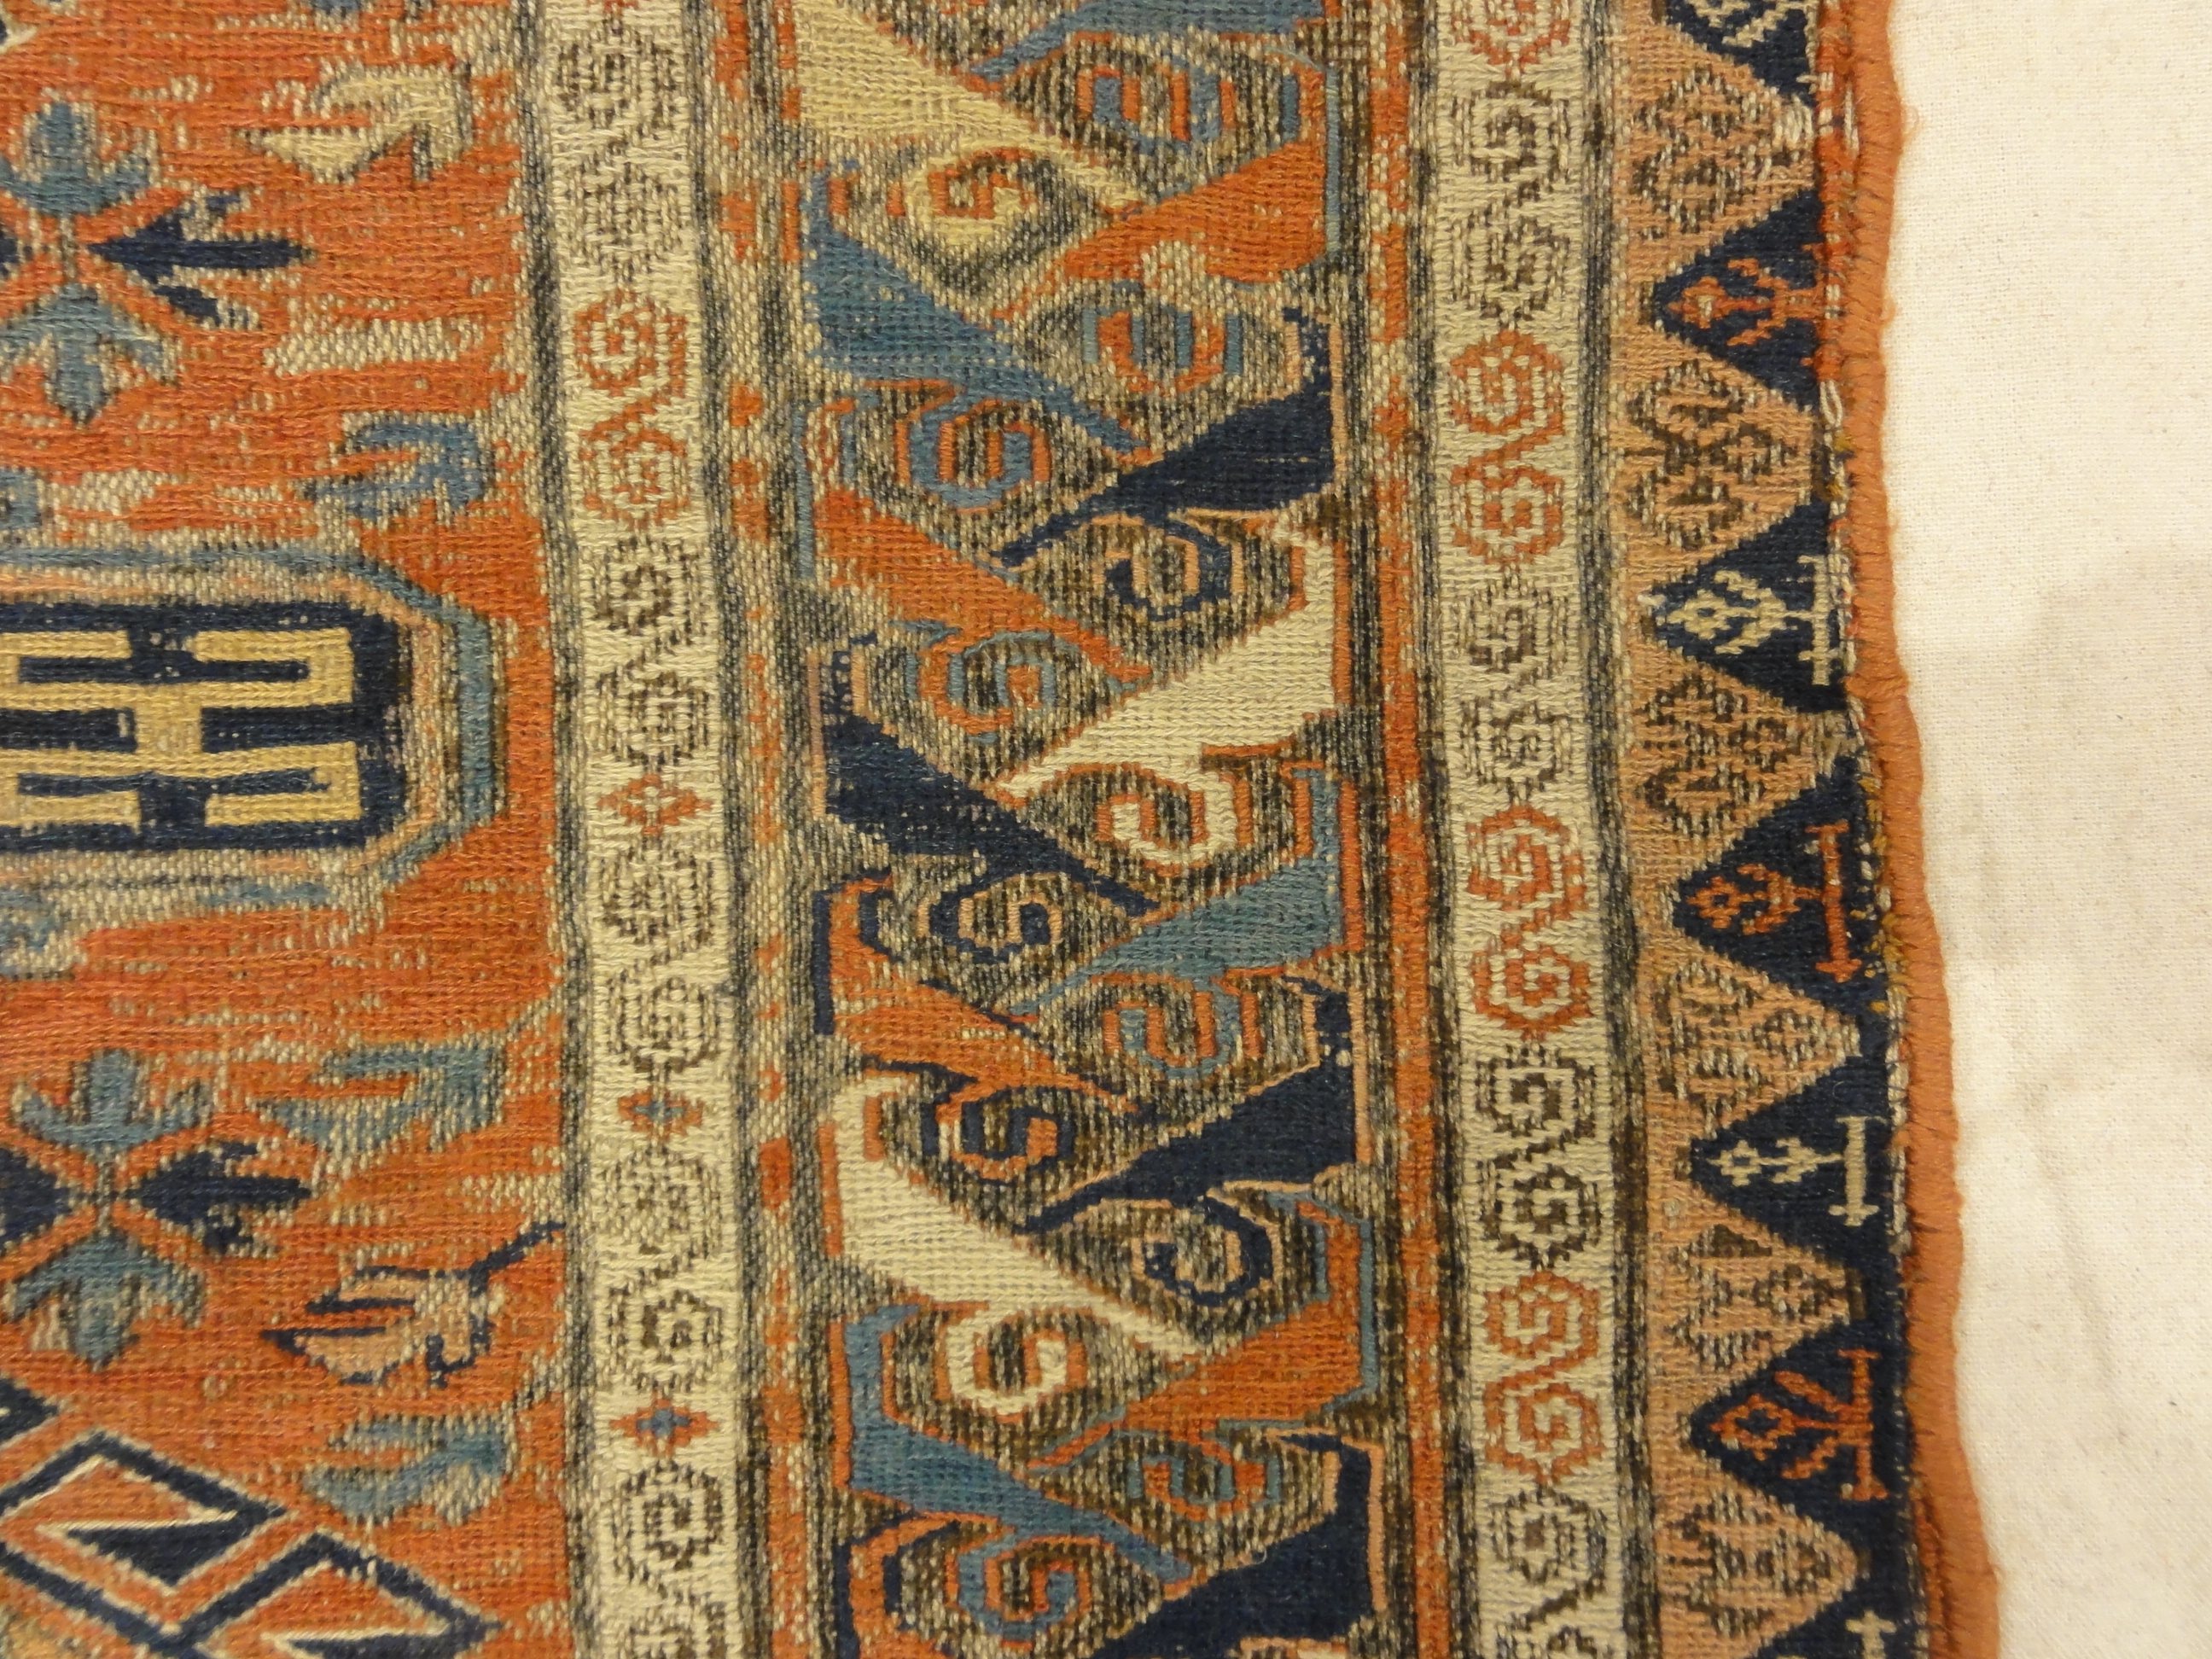 Antique Soumak Kuba Rug. A piece of genuine authentic woven carpet art sold by Santa Barbara Design Center Rugs and More.